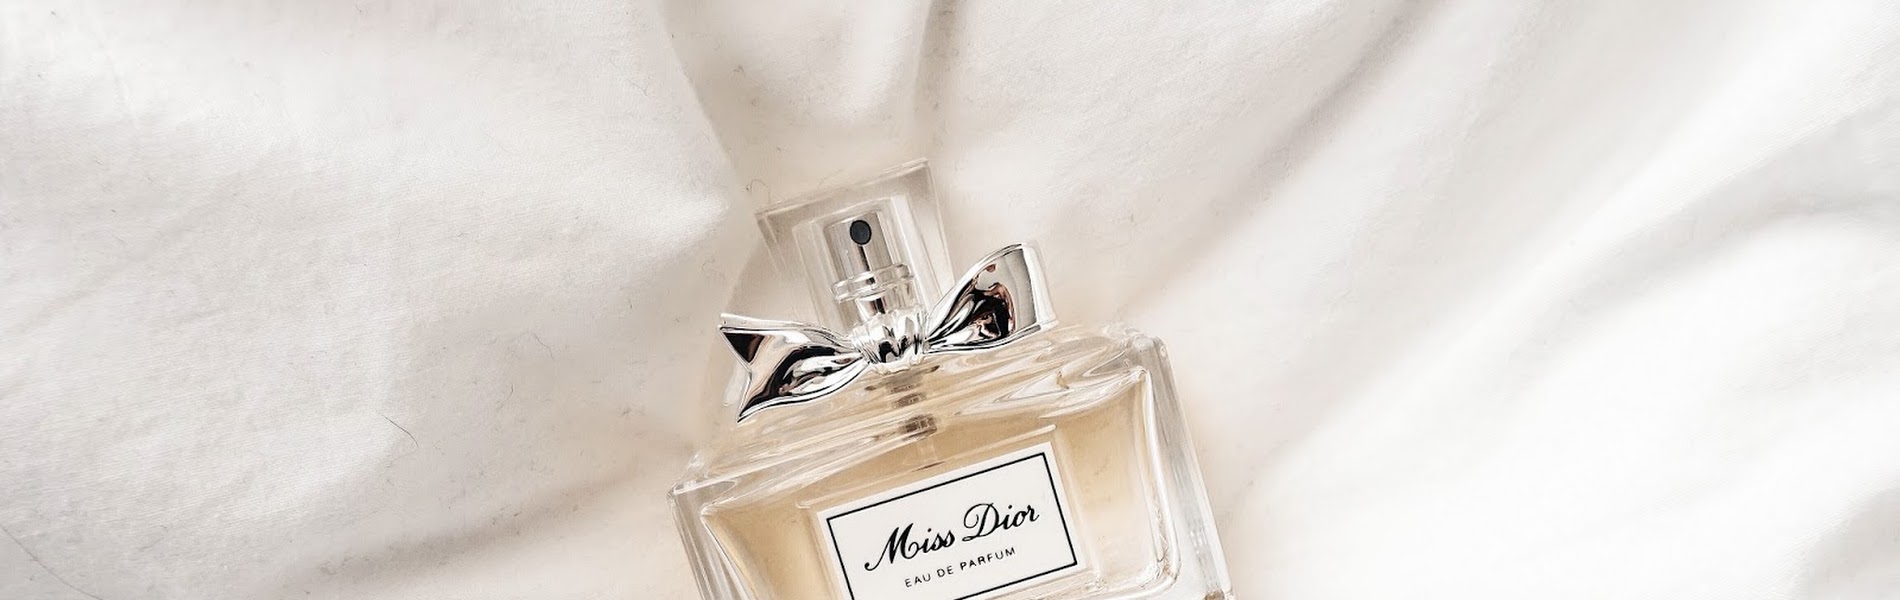 miss dior 2017 review